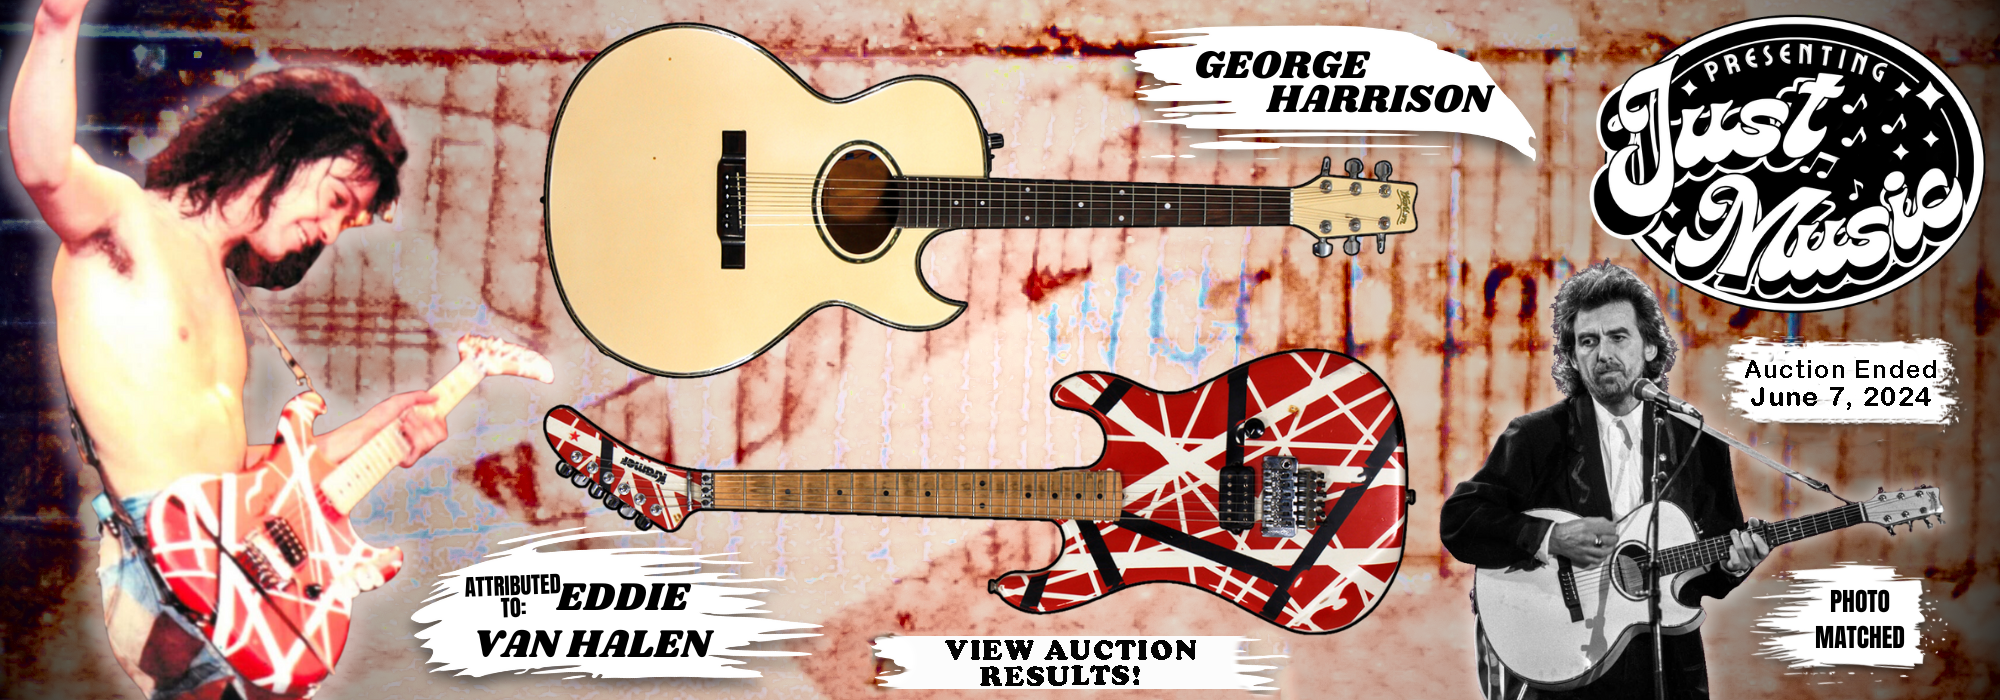 Just Music Auction